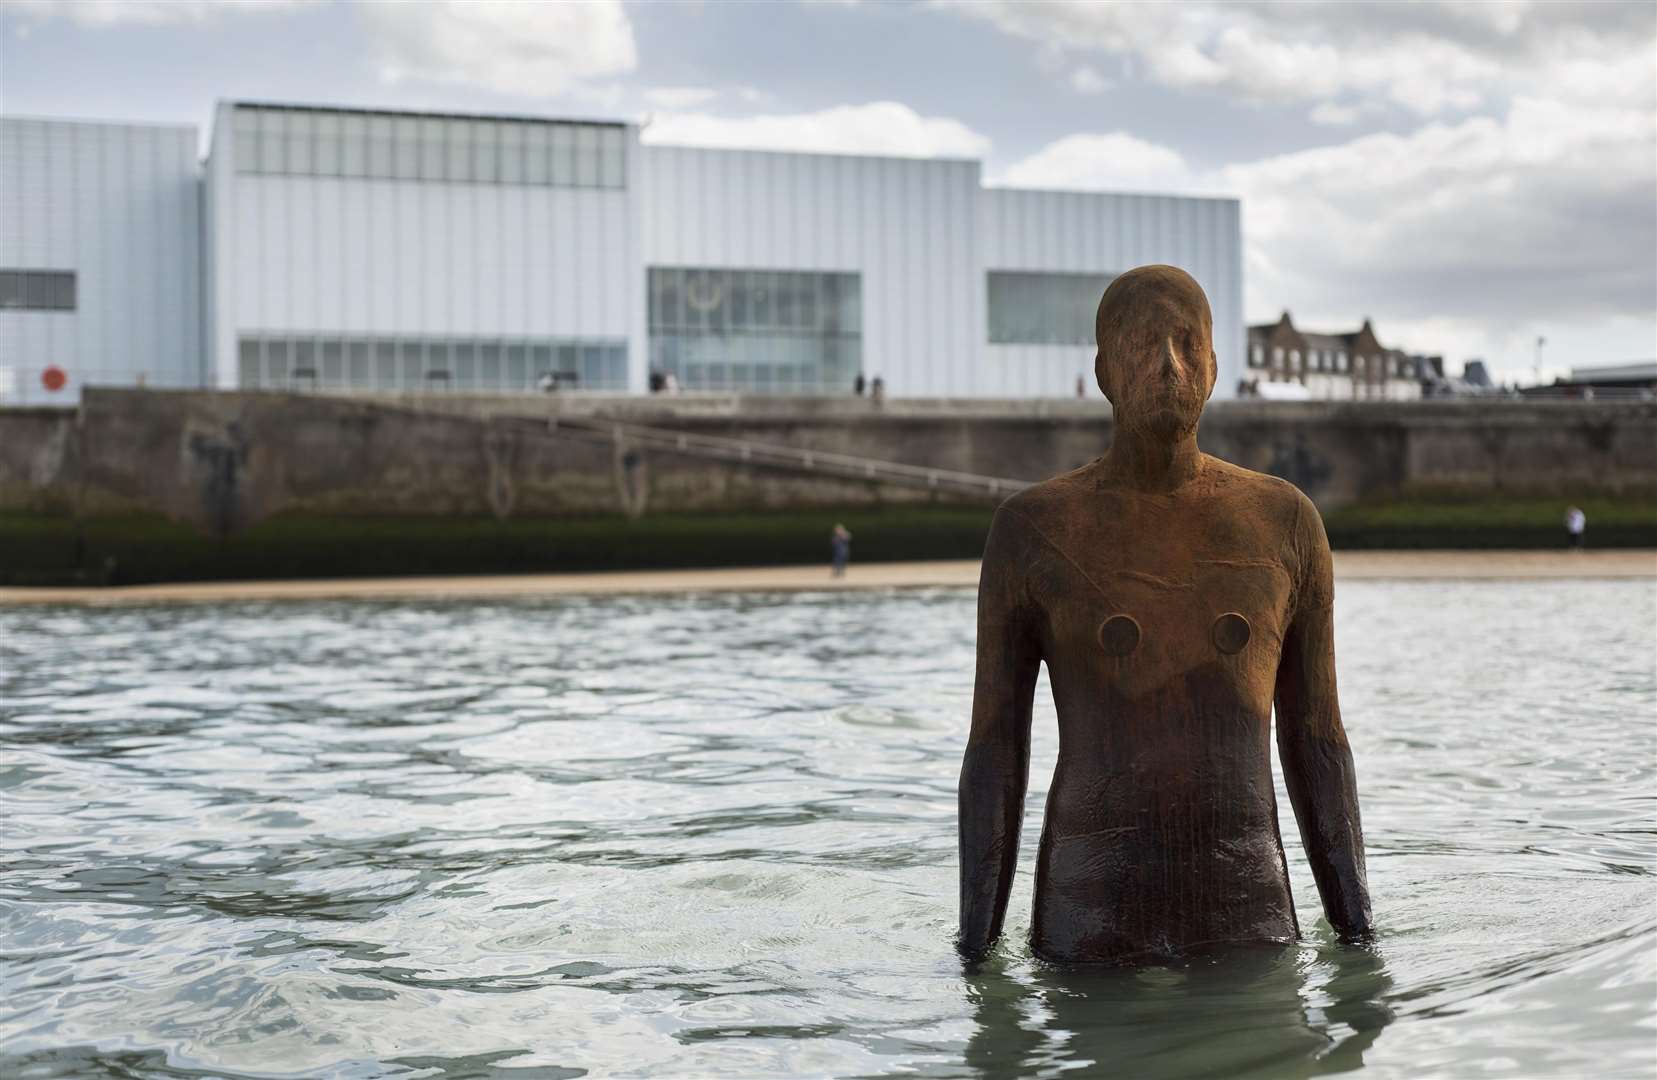 Margate's plus one...Antony Gormley's sculpture Another Time outside the Turner